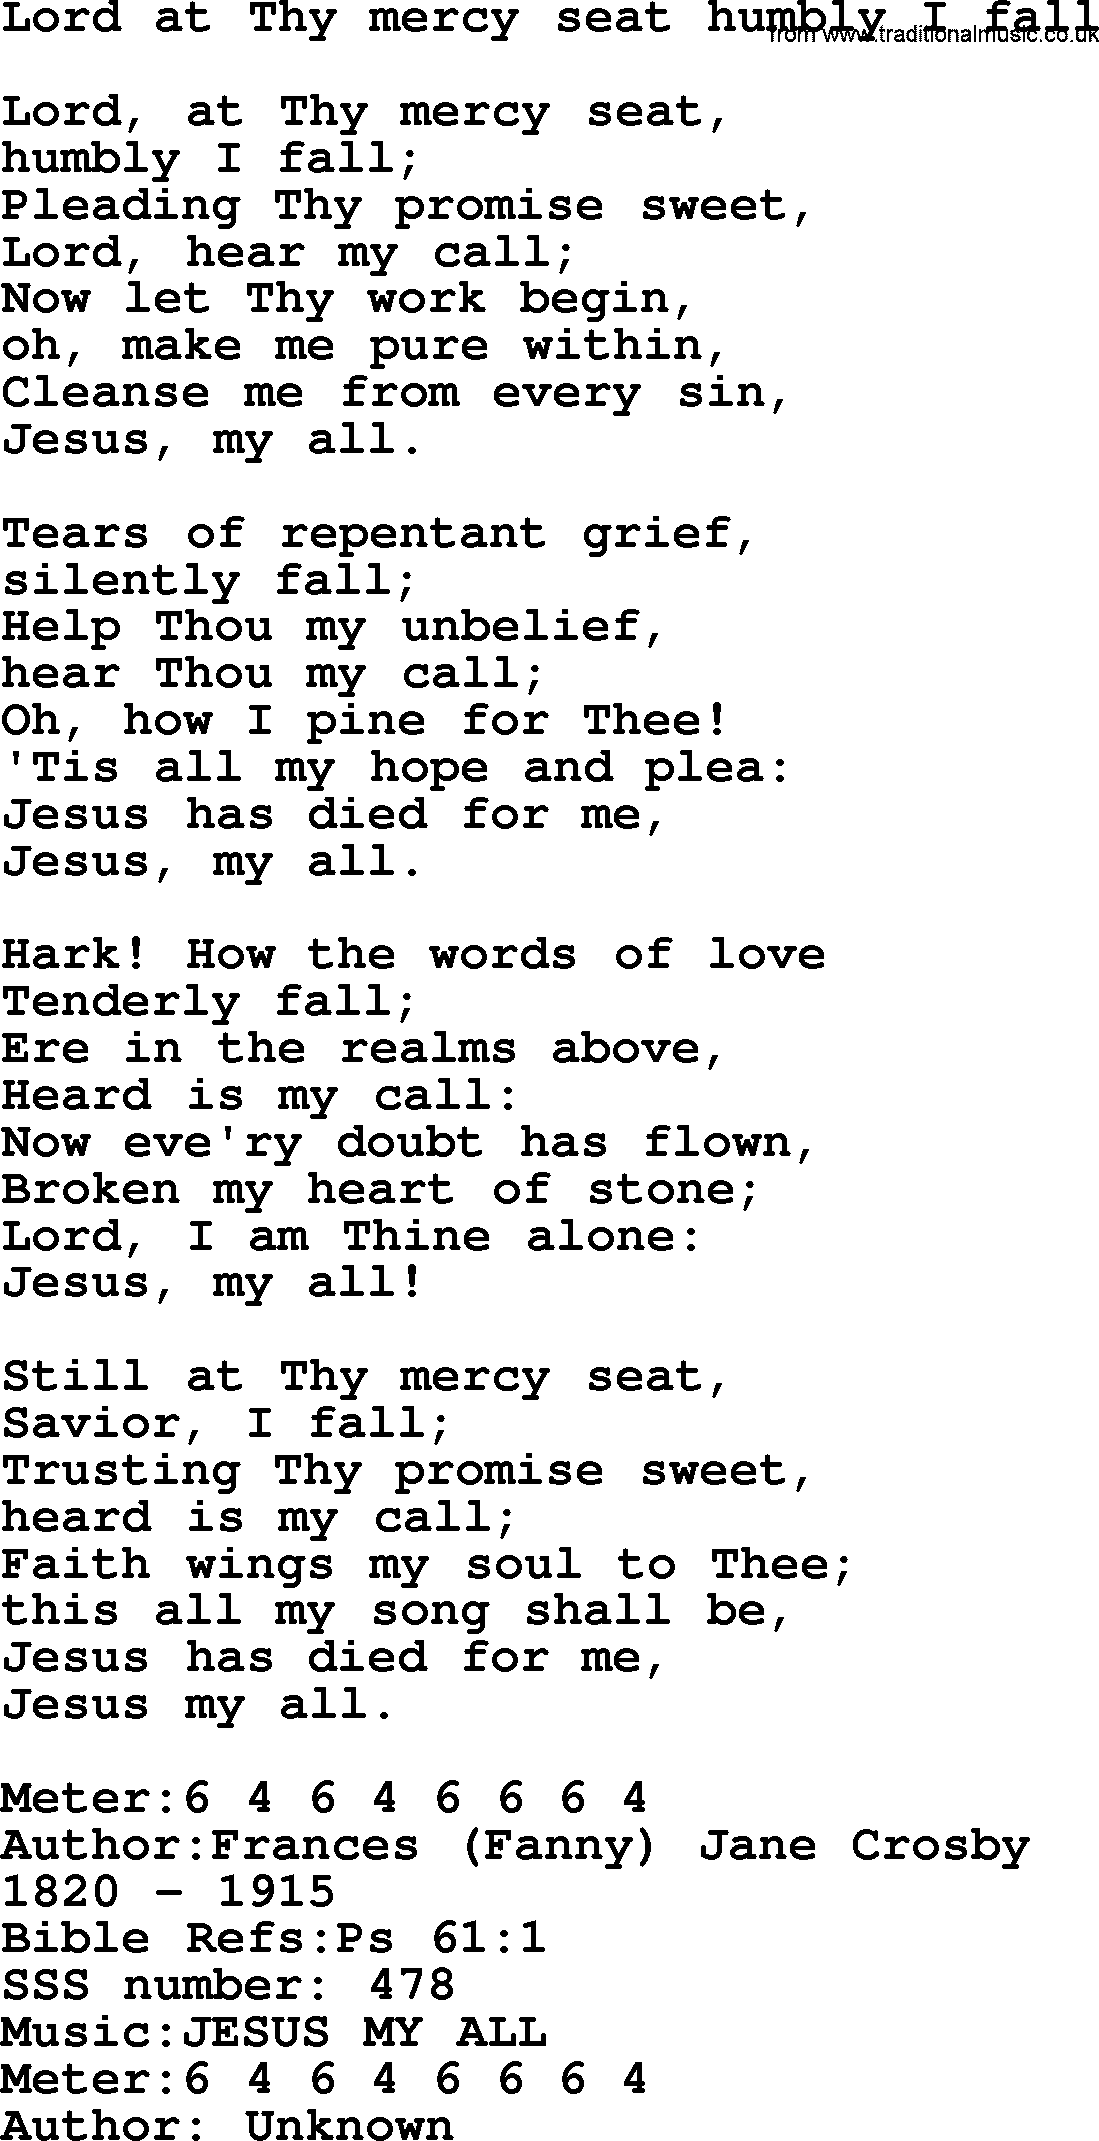 Sacred Songs and Solos complete, 1200 Hymns, title: Lord At Thy Mercy Seat Humbly I Fall, lyrics and PDF